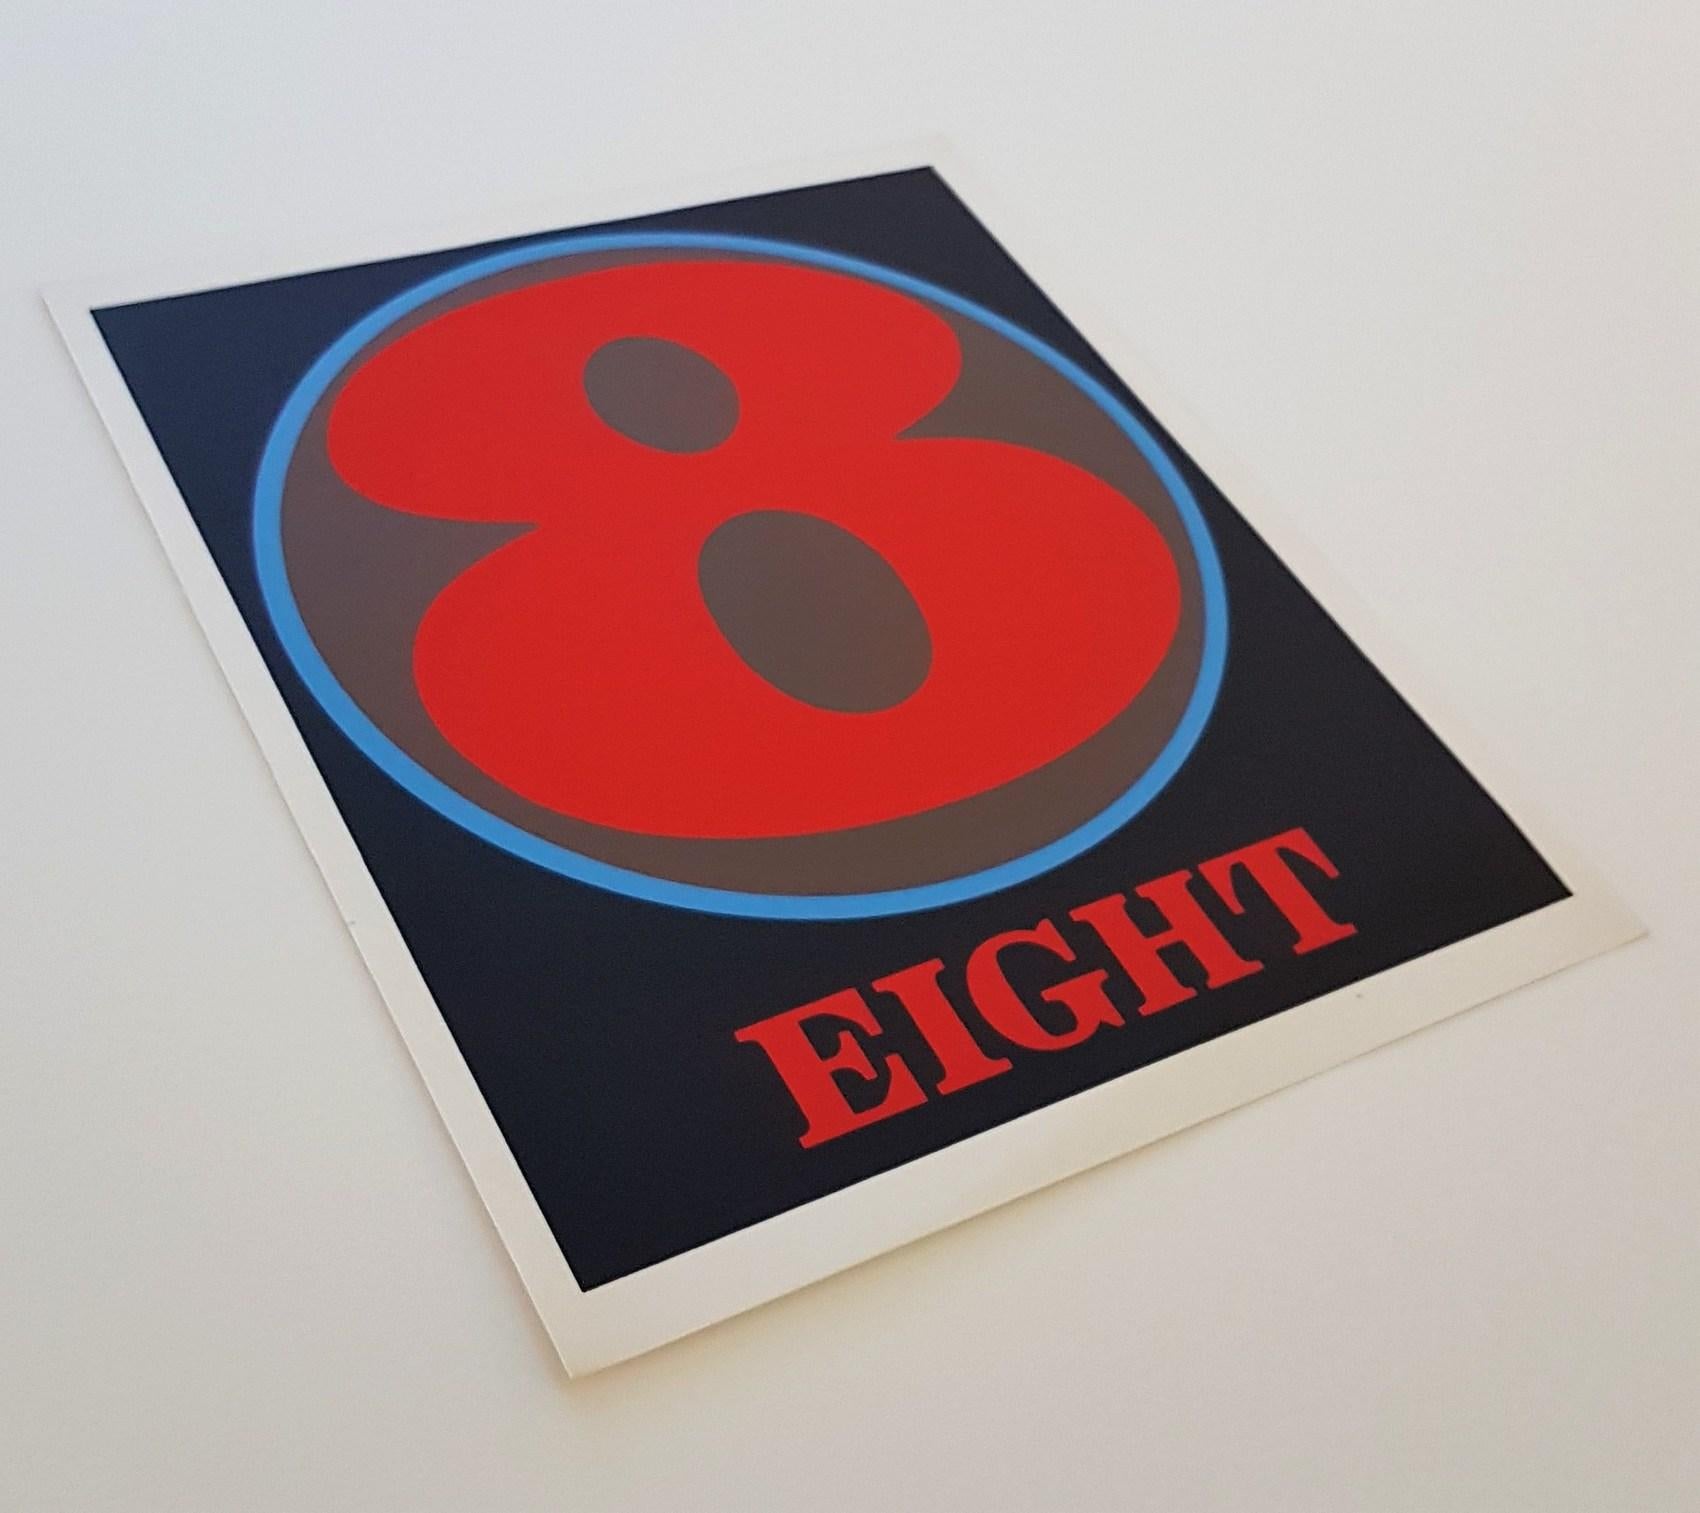 Number Suite - Eight - Print by Robert Indiana